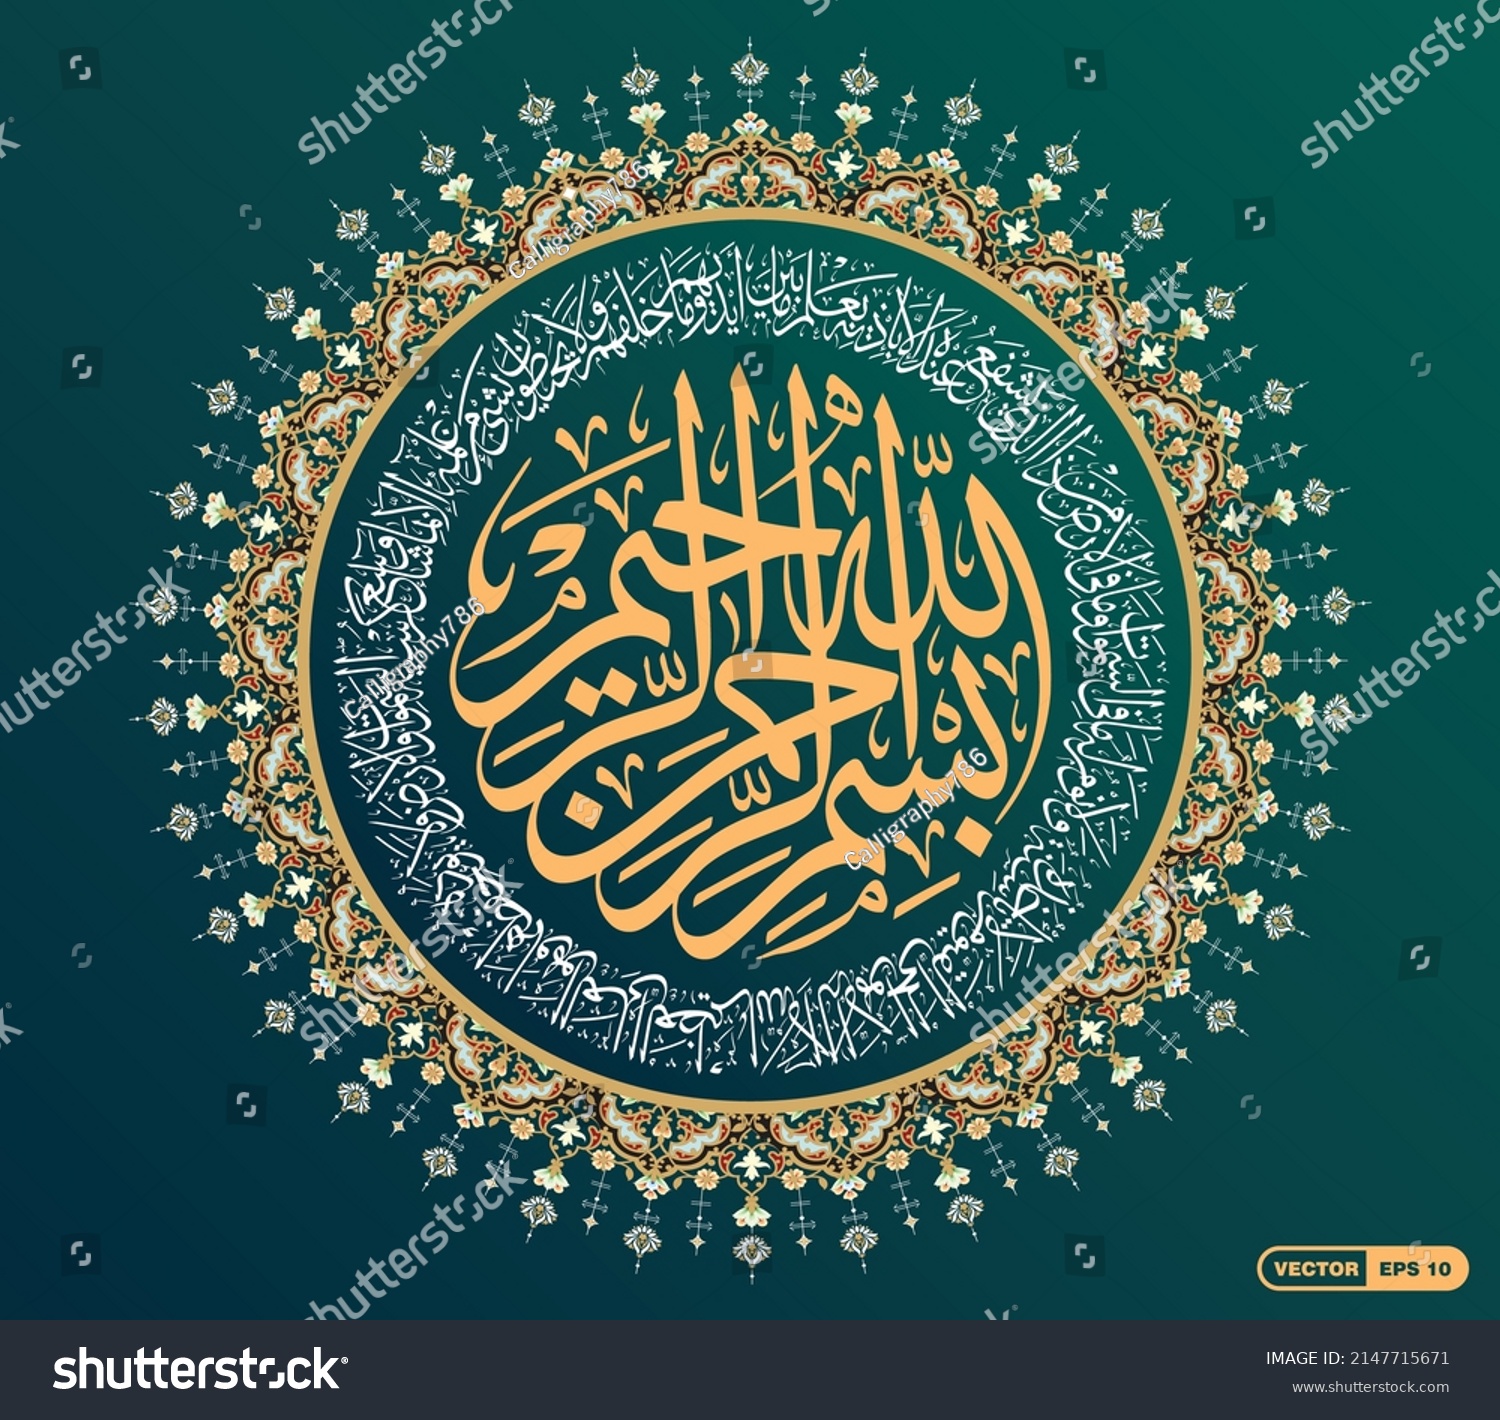 SVG of Bismillah and Ayat UL Kursi arabic calligraphy in radial shape with beautiful floral borders, is English meaning; 